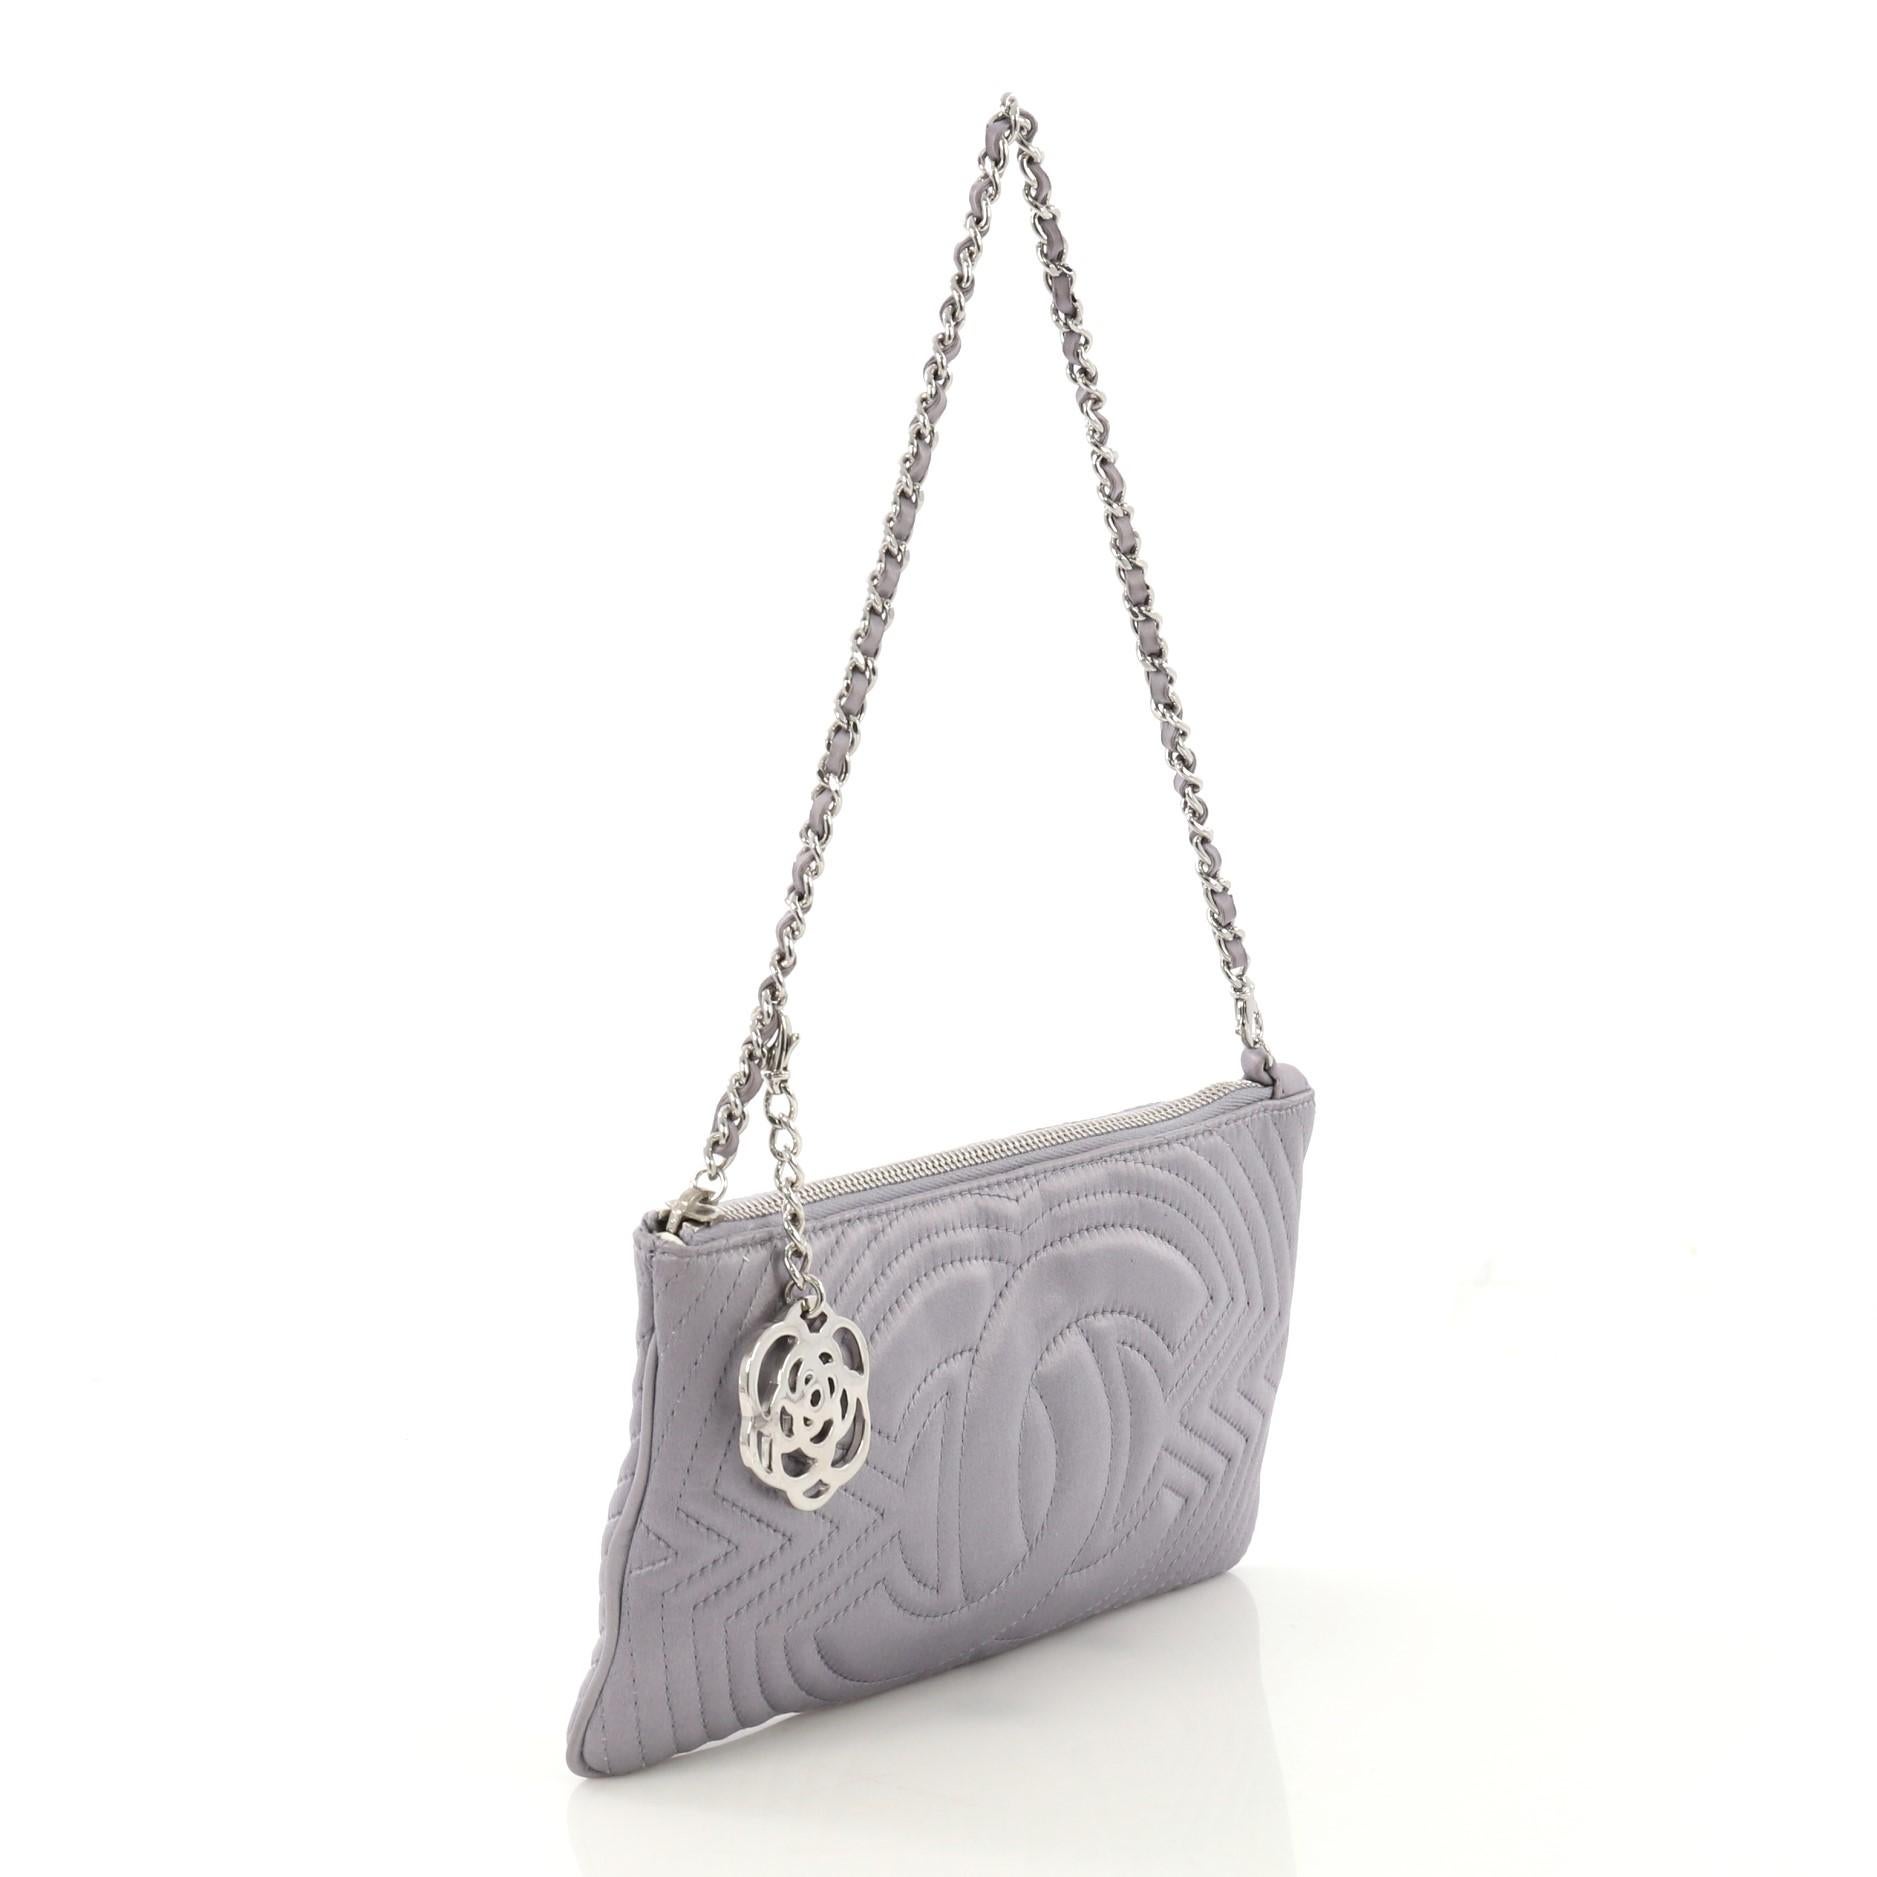 This Chanel CC Chain Clutch Stitched Satin, crafted in purple quilted satin, features a woven in leather chain-link strap, Camellia charm and silver-tone hardware. Its zip closure opens to an off-white fabric interior with slip pocket. Hologram